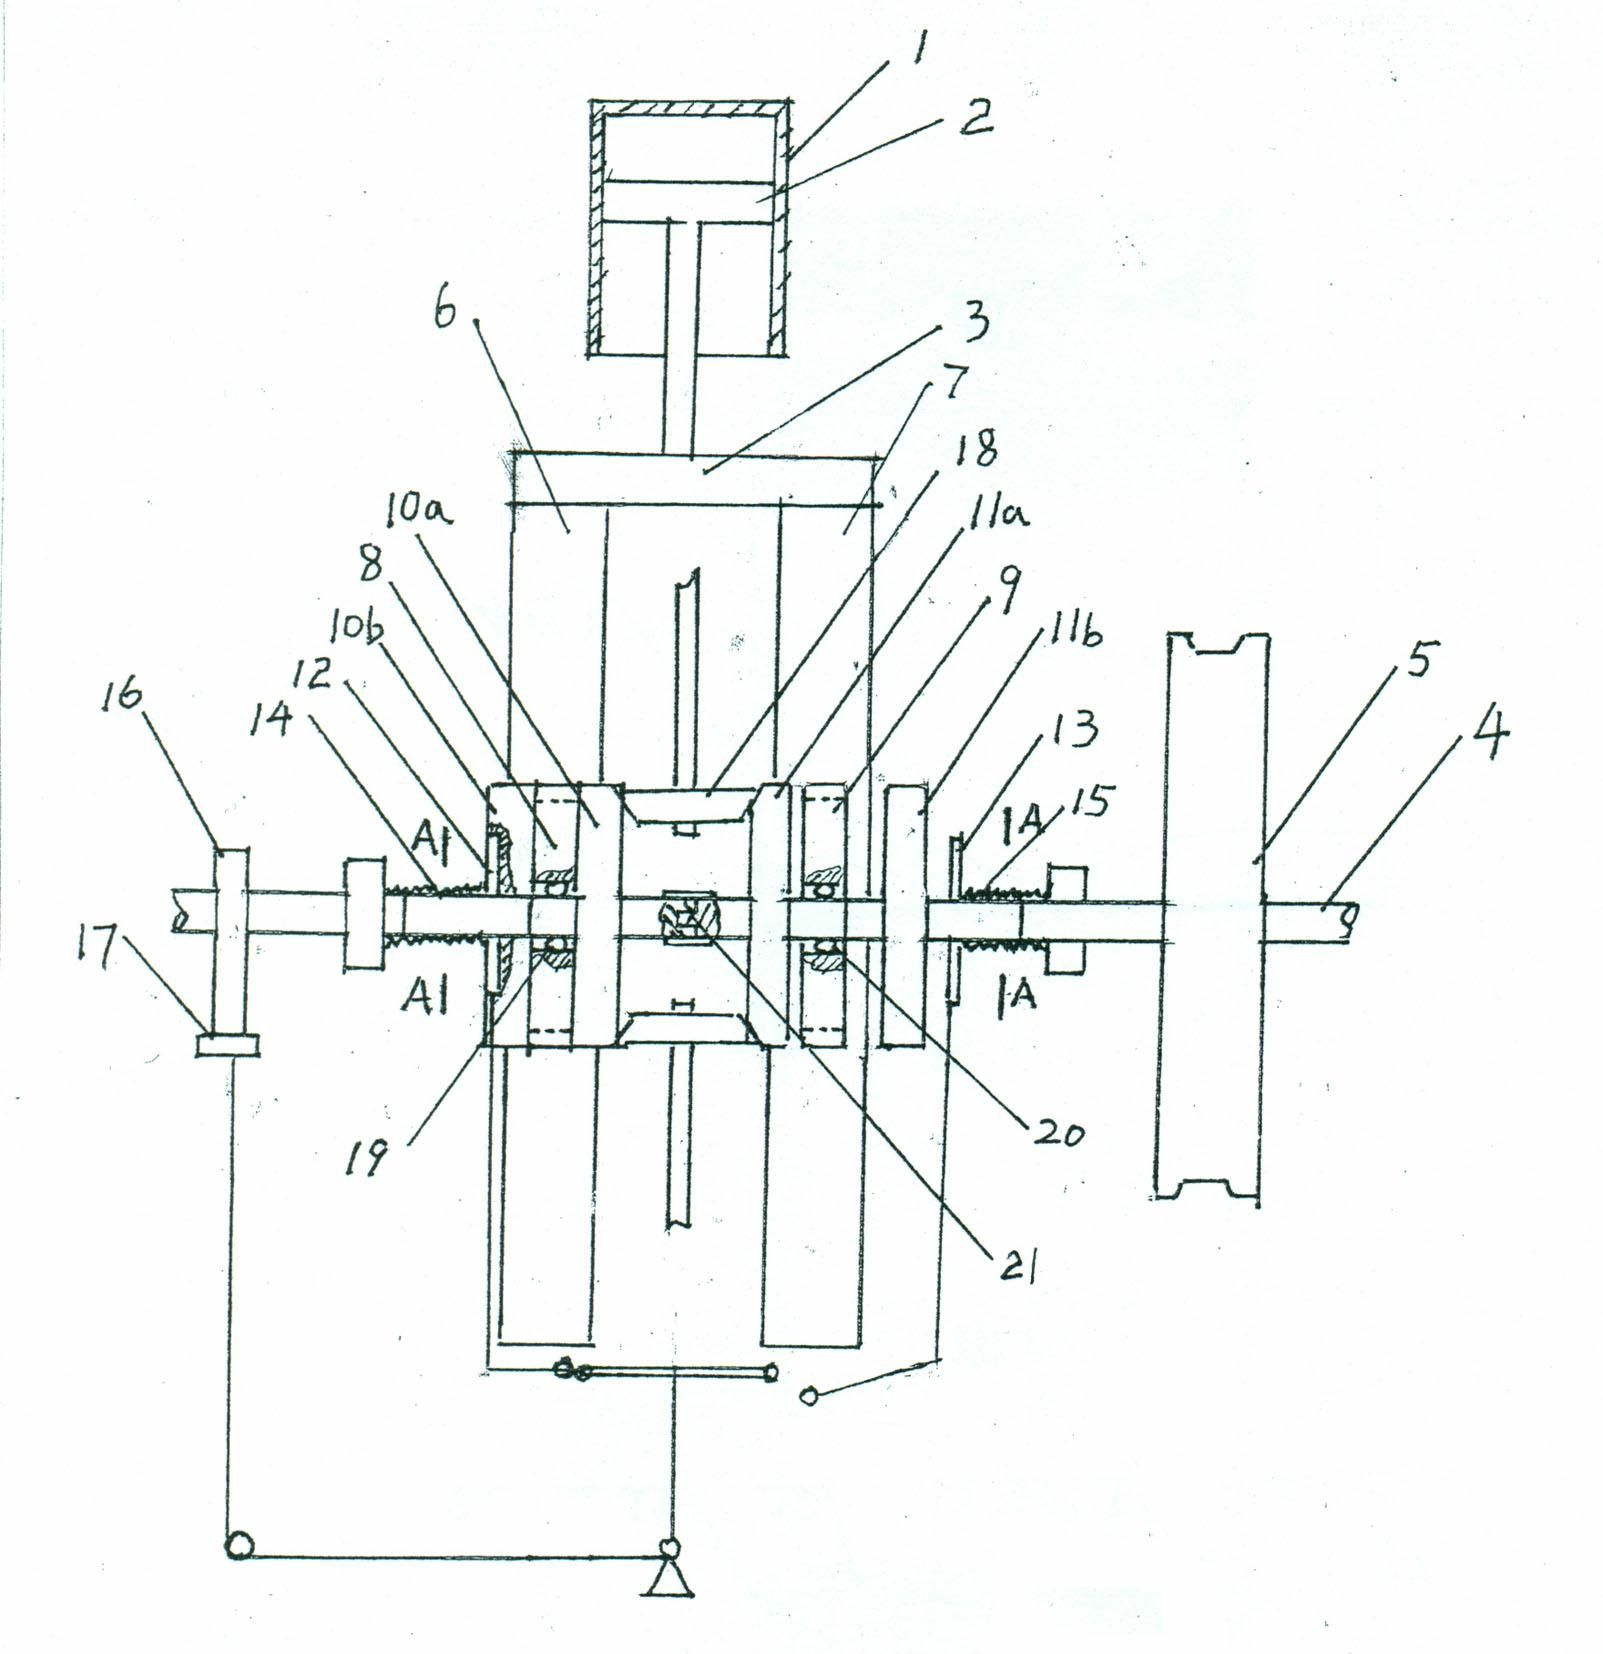 Linear transmission reciprocating-type internal combustion engine